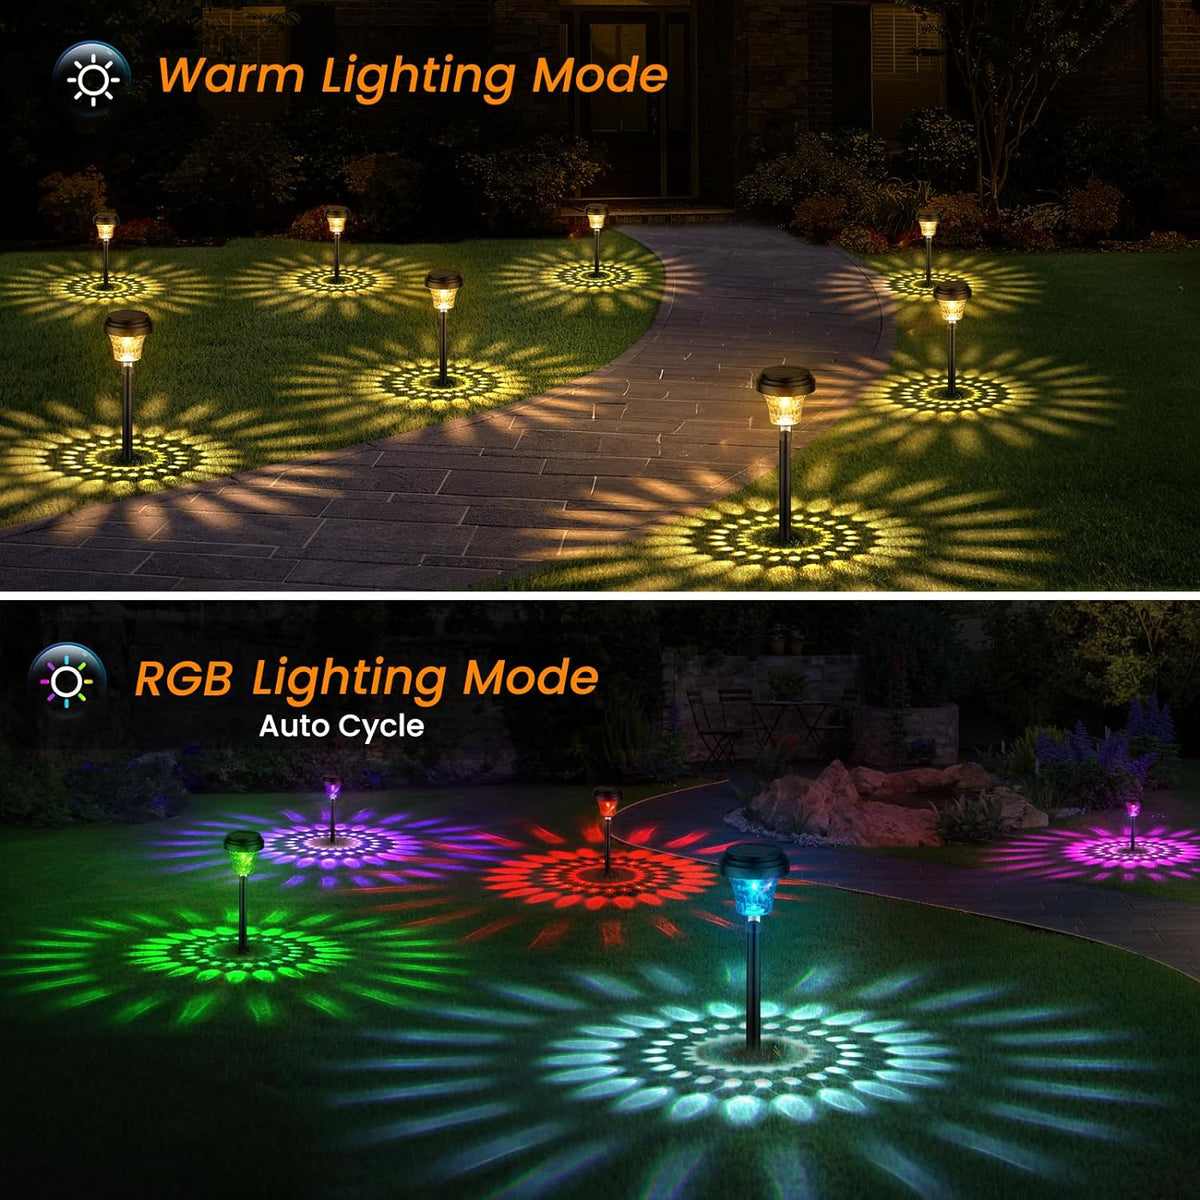 Solar Lights Outdoor Garden Stake,8 Pcs Solar Path Lights Garden Ornaments Outdoor,Garden Lights Solar Powered Waterproof with Warm White & RGB